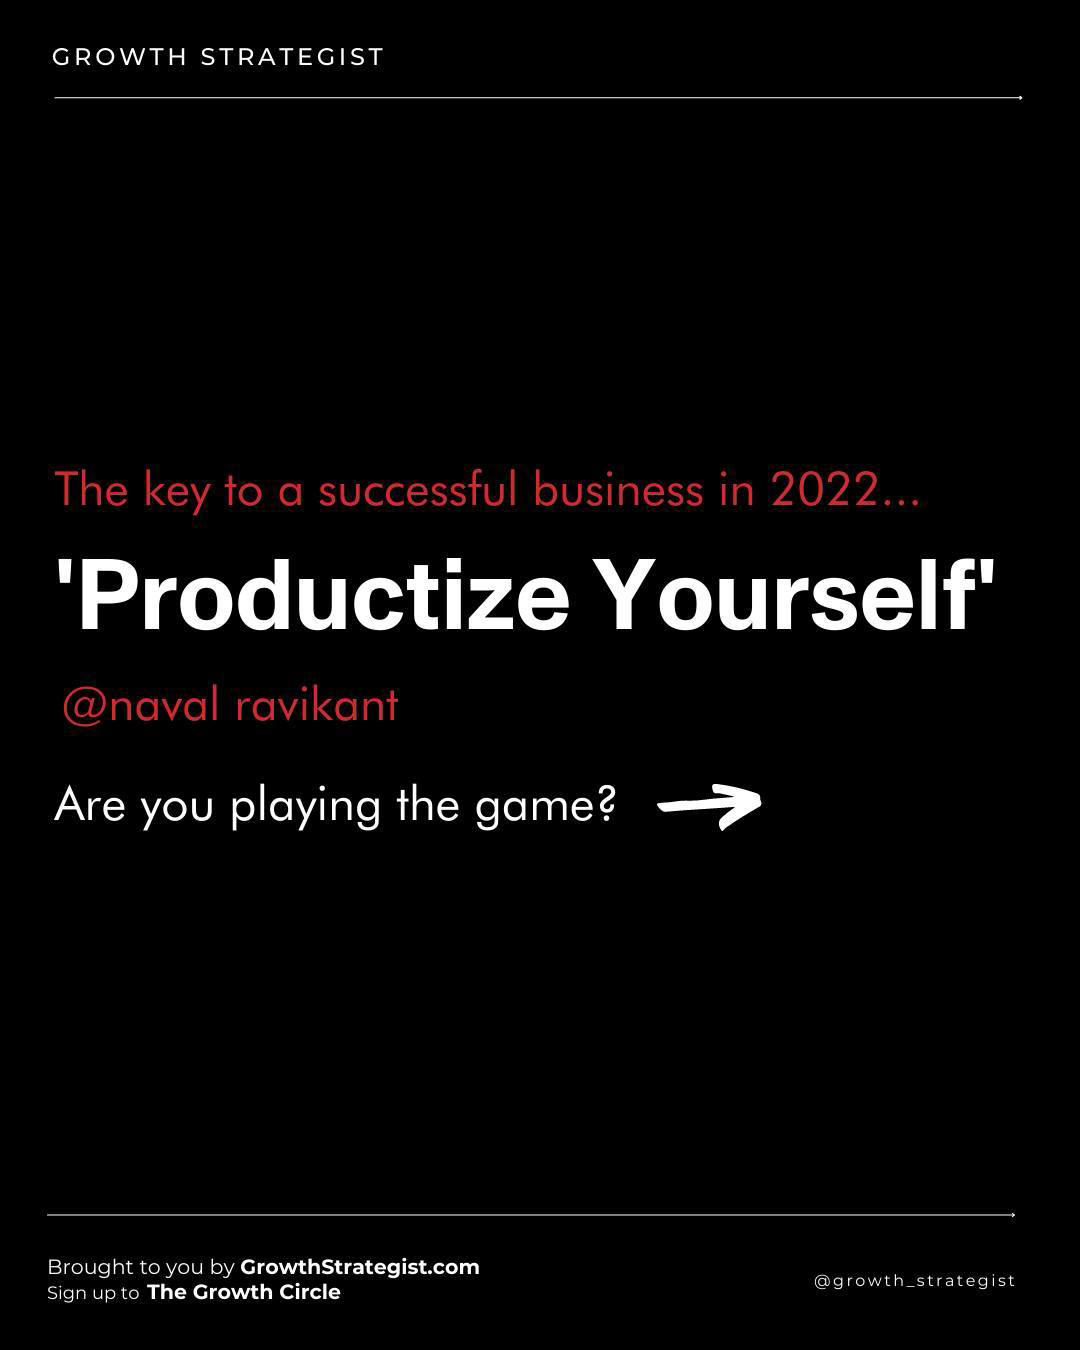 image  1 Growth Strategist - “Productize yourself“ - #NavalRavikant  To be successful in business, we need to